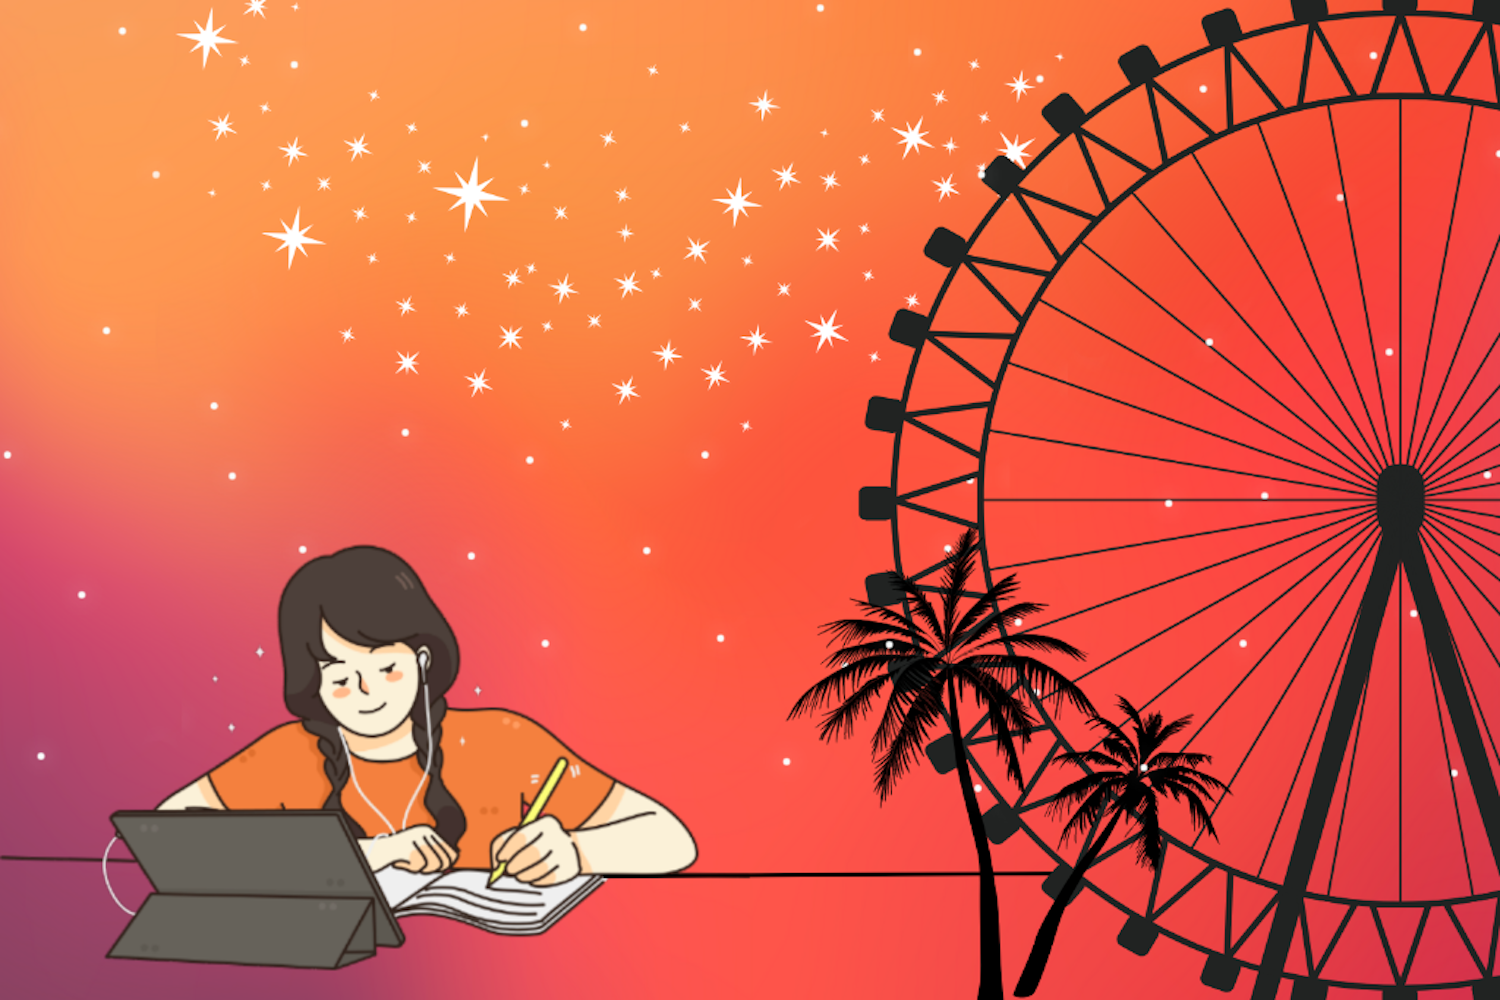 Person studying with Palm Trees and a Ferris Wheel next to them